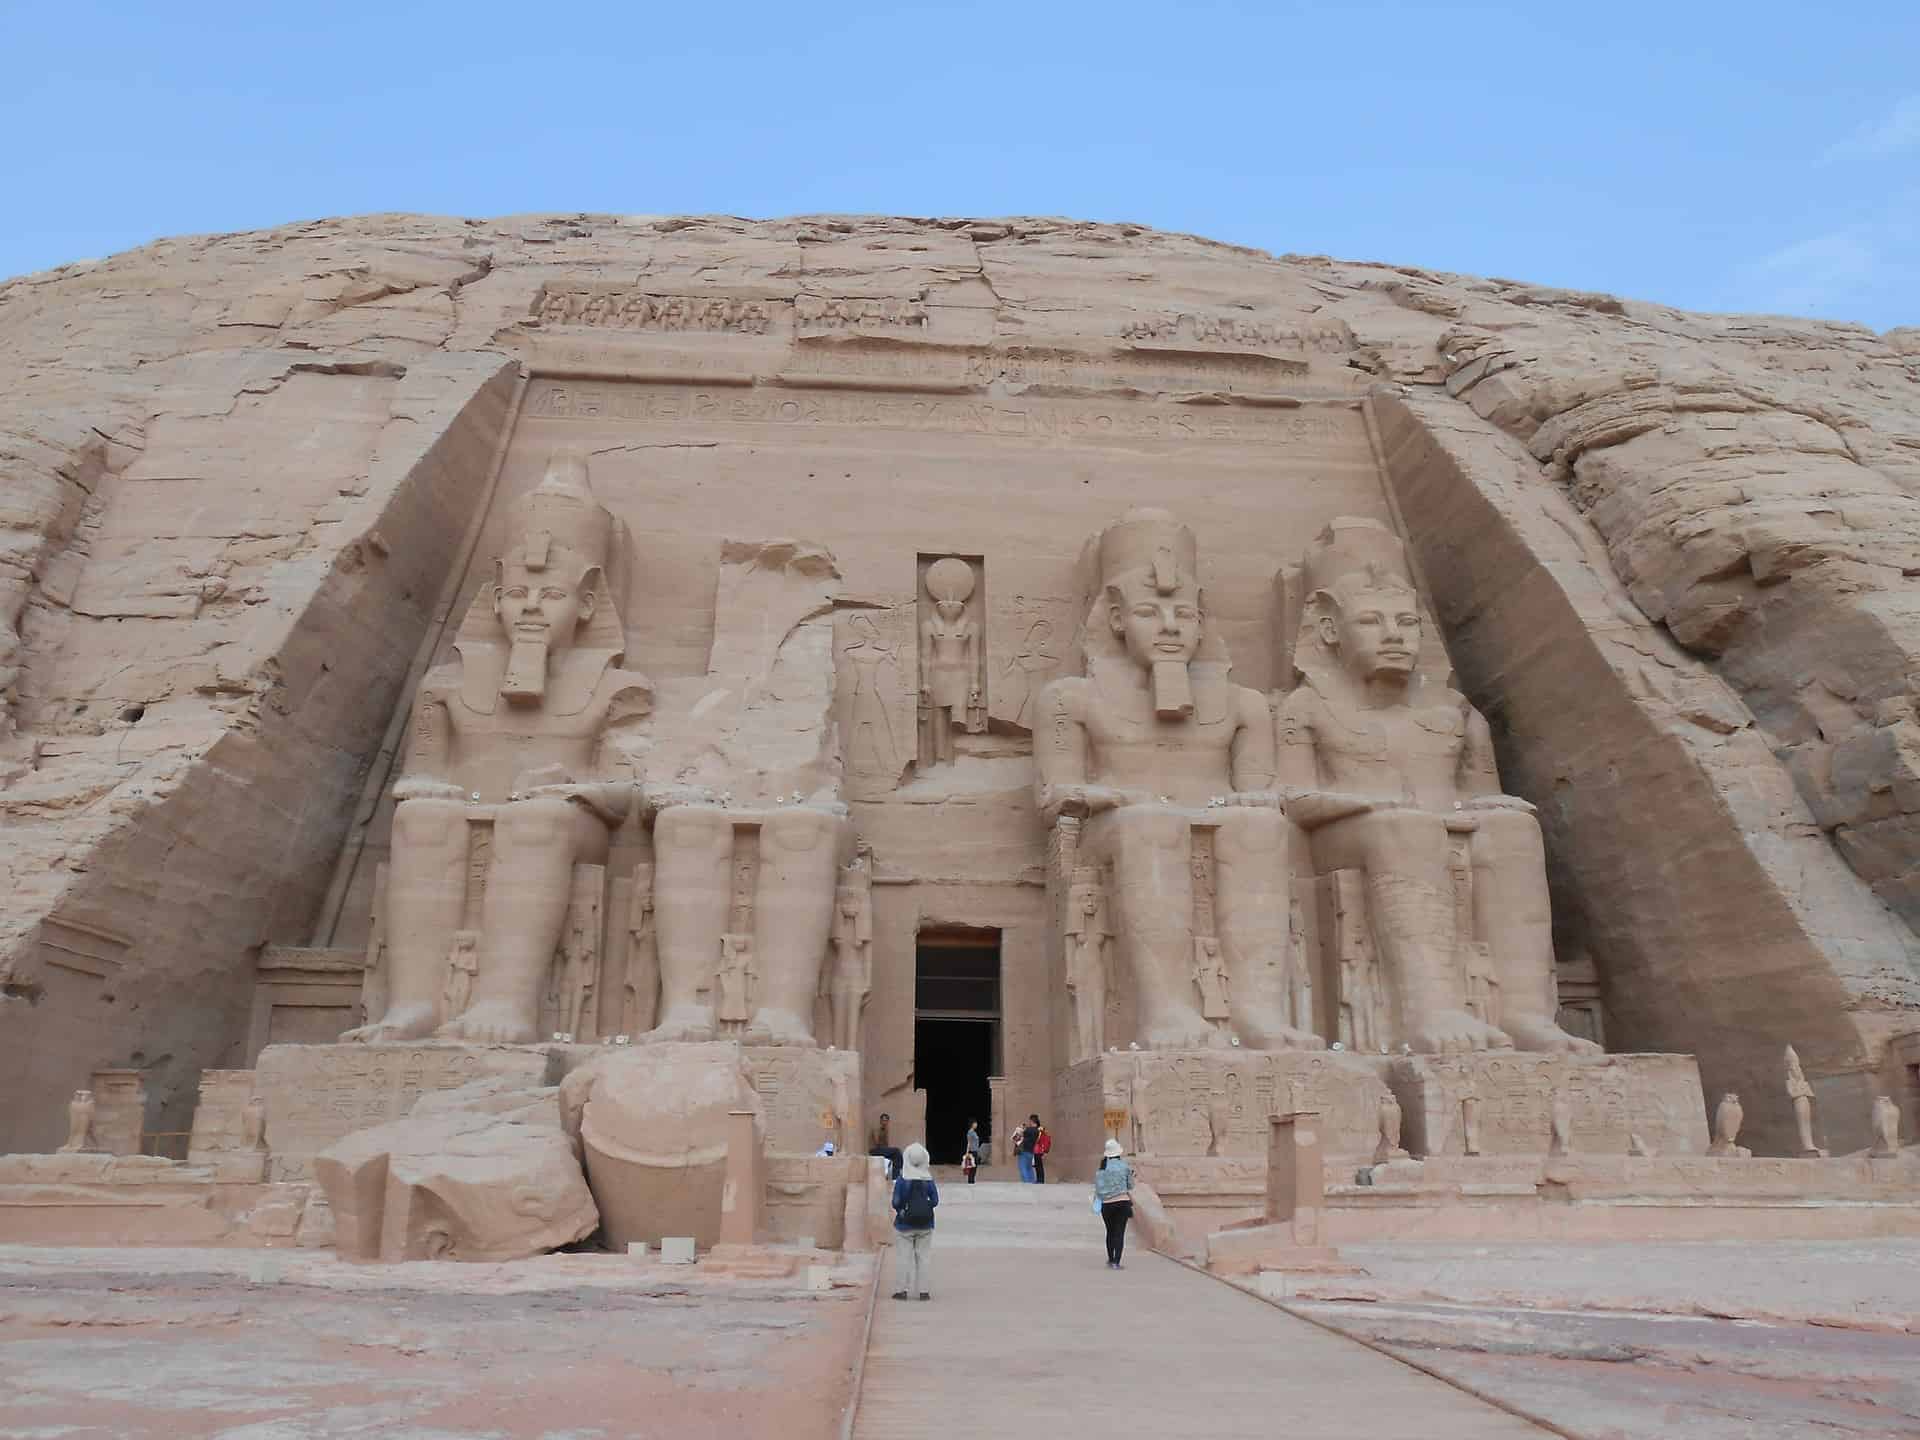 Abu Simbel temple, one of the most amazing historical sites in upper Egypt